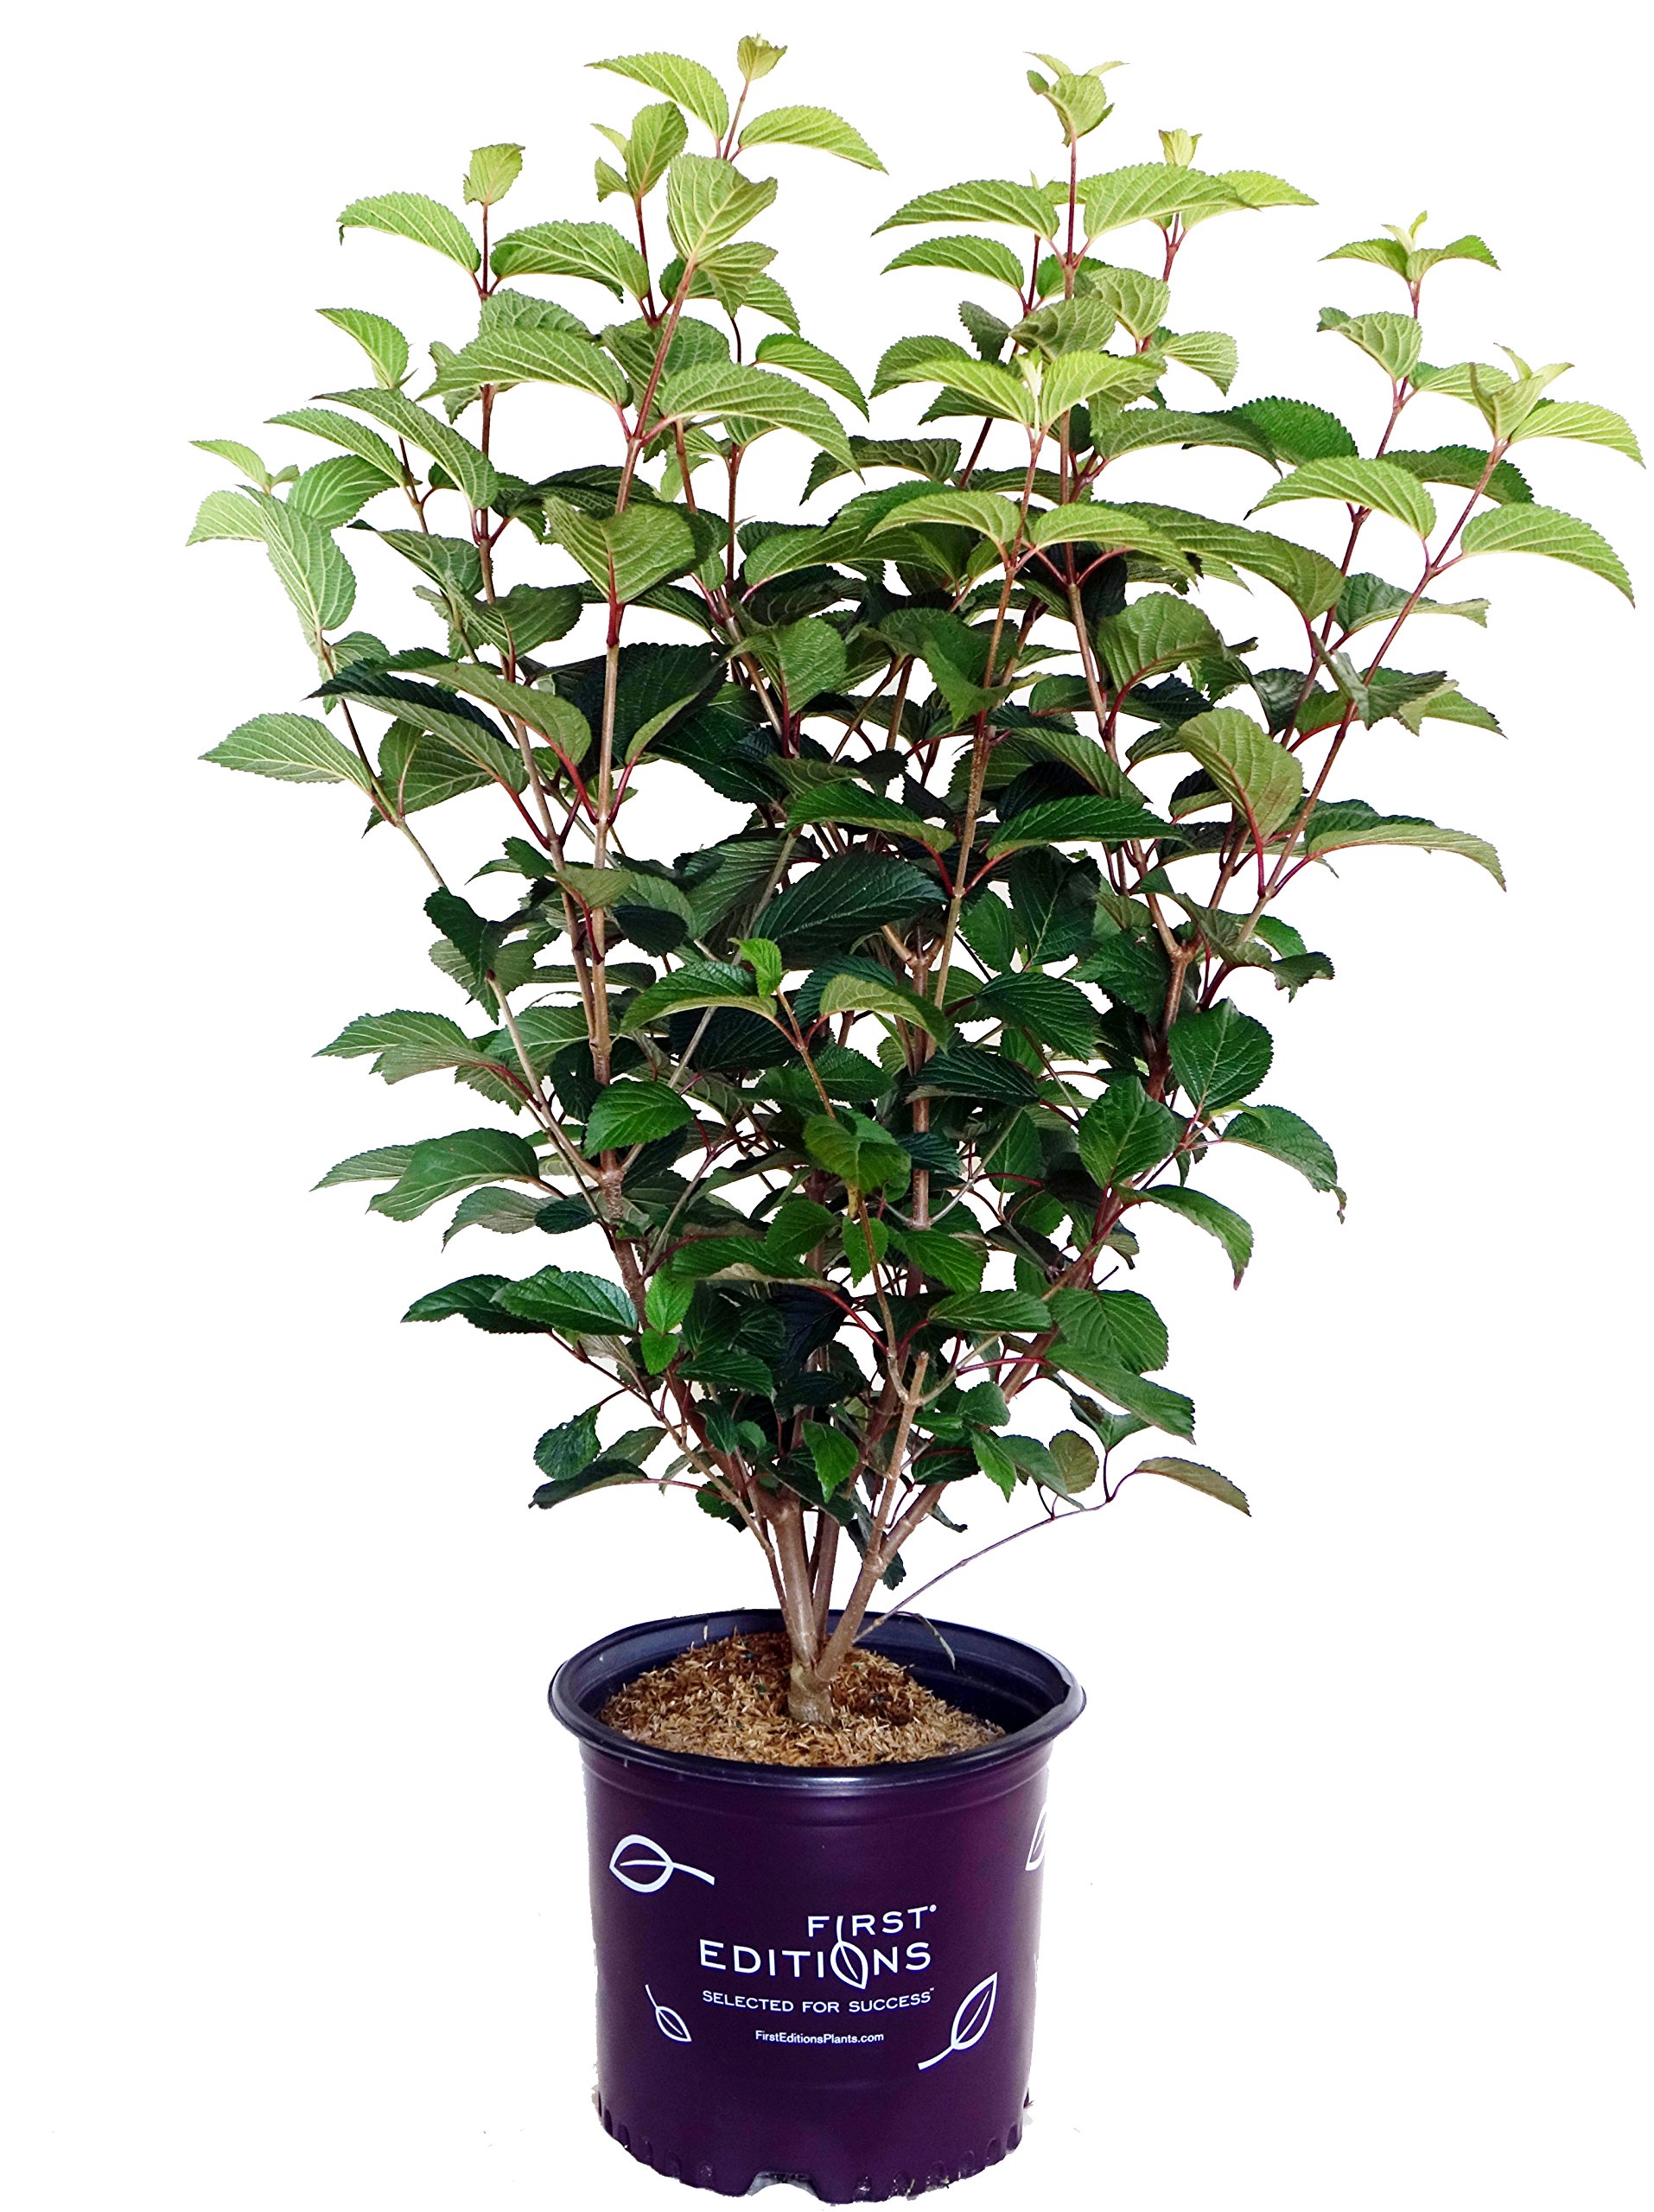 First Editions - Viburnum plicatum Opening Day (Doublefile Viburnum) Shrub, white ball-shaped flowers, #3 - Size Container